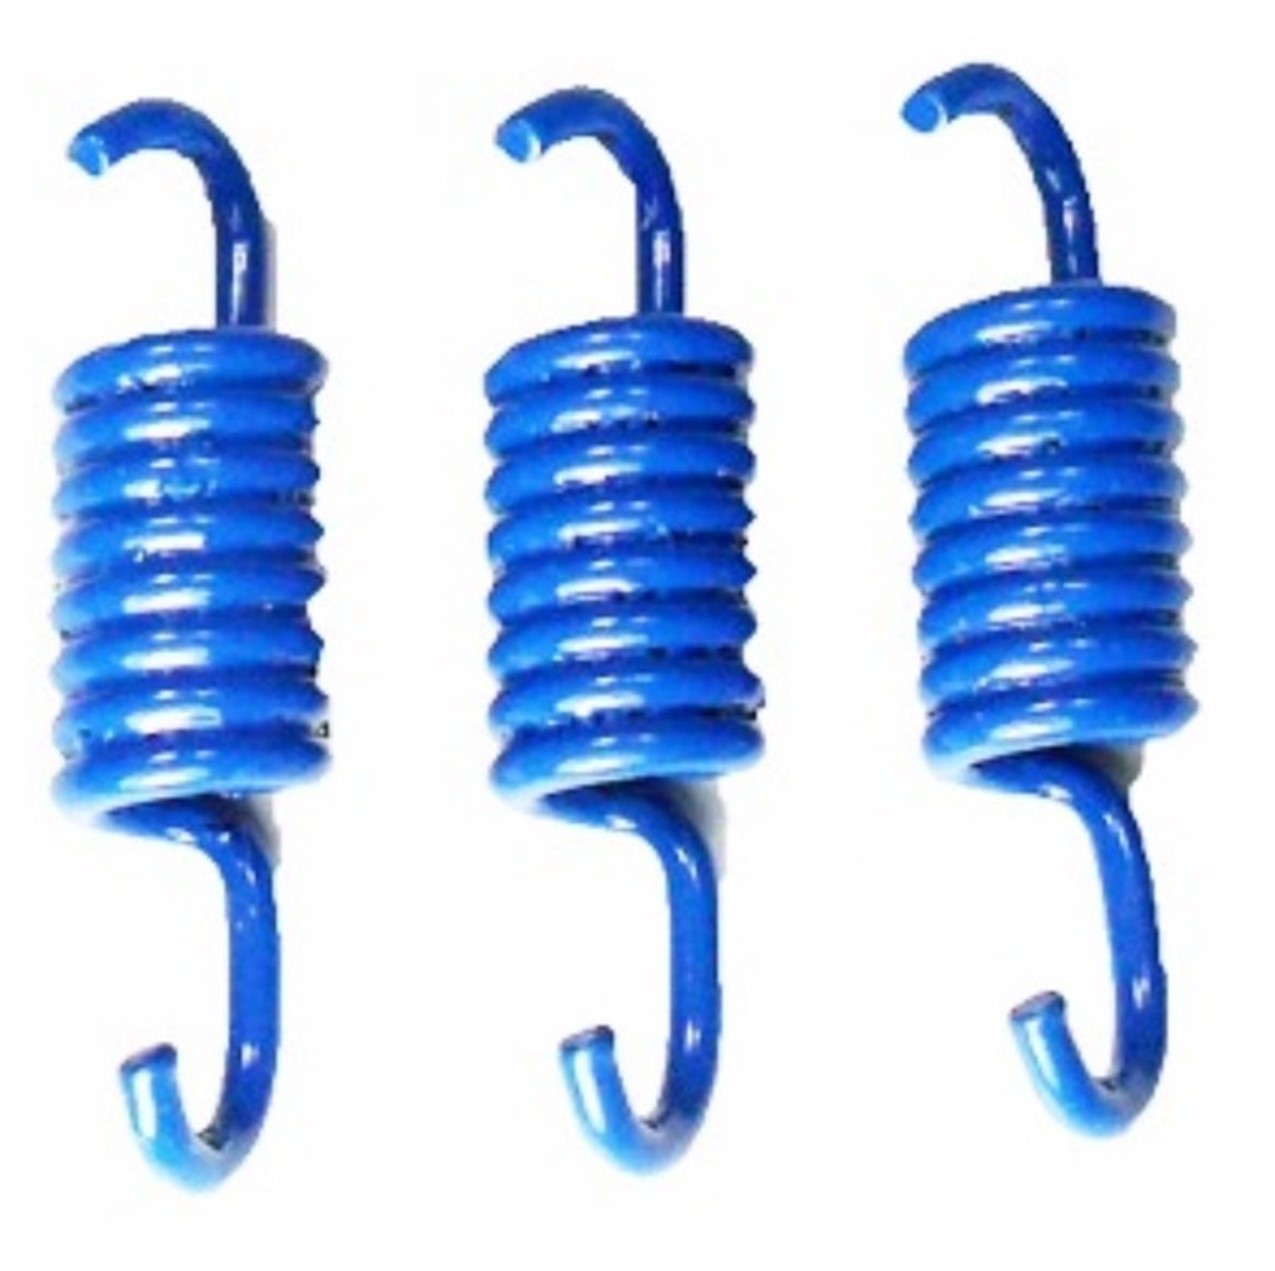 Clutch Spring Set HIGH PERFORMANCE Blue +1000 RPM GY6-125, GY6-150 Chinese ATVs, GoKarts, Scooters